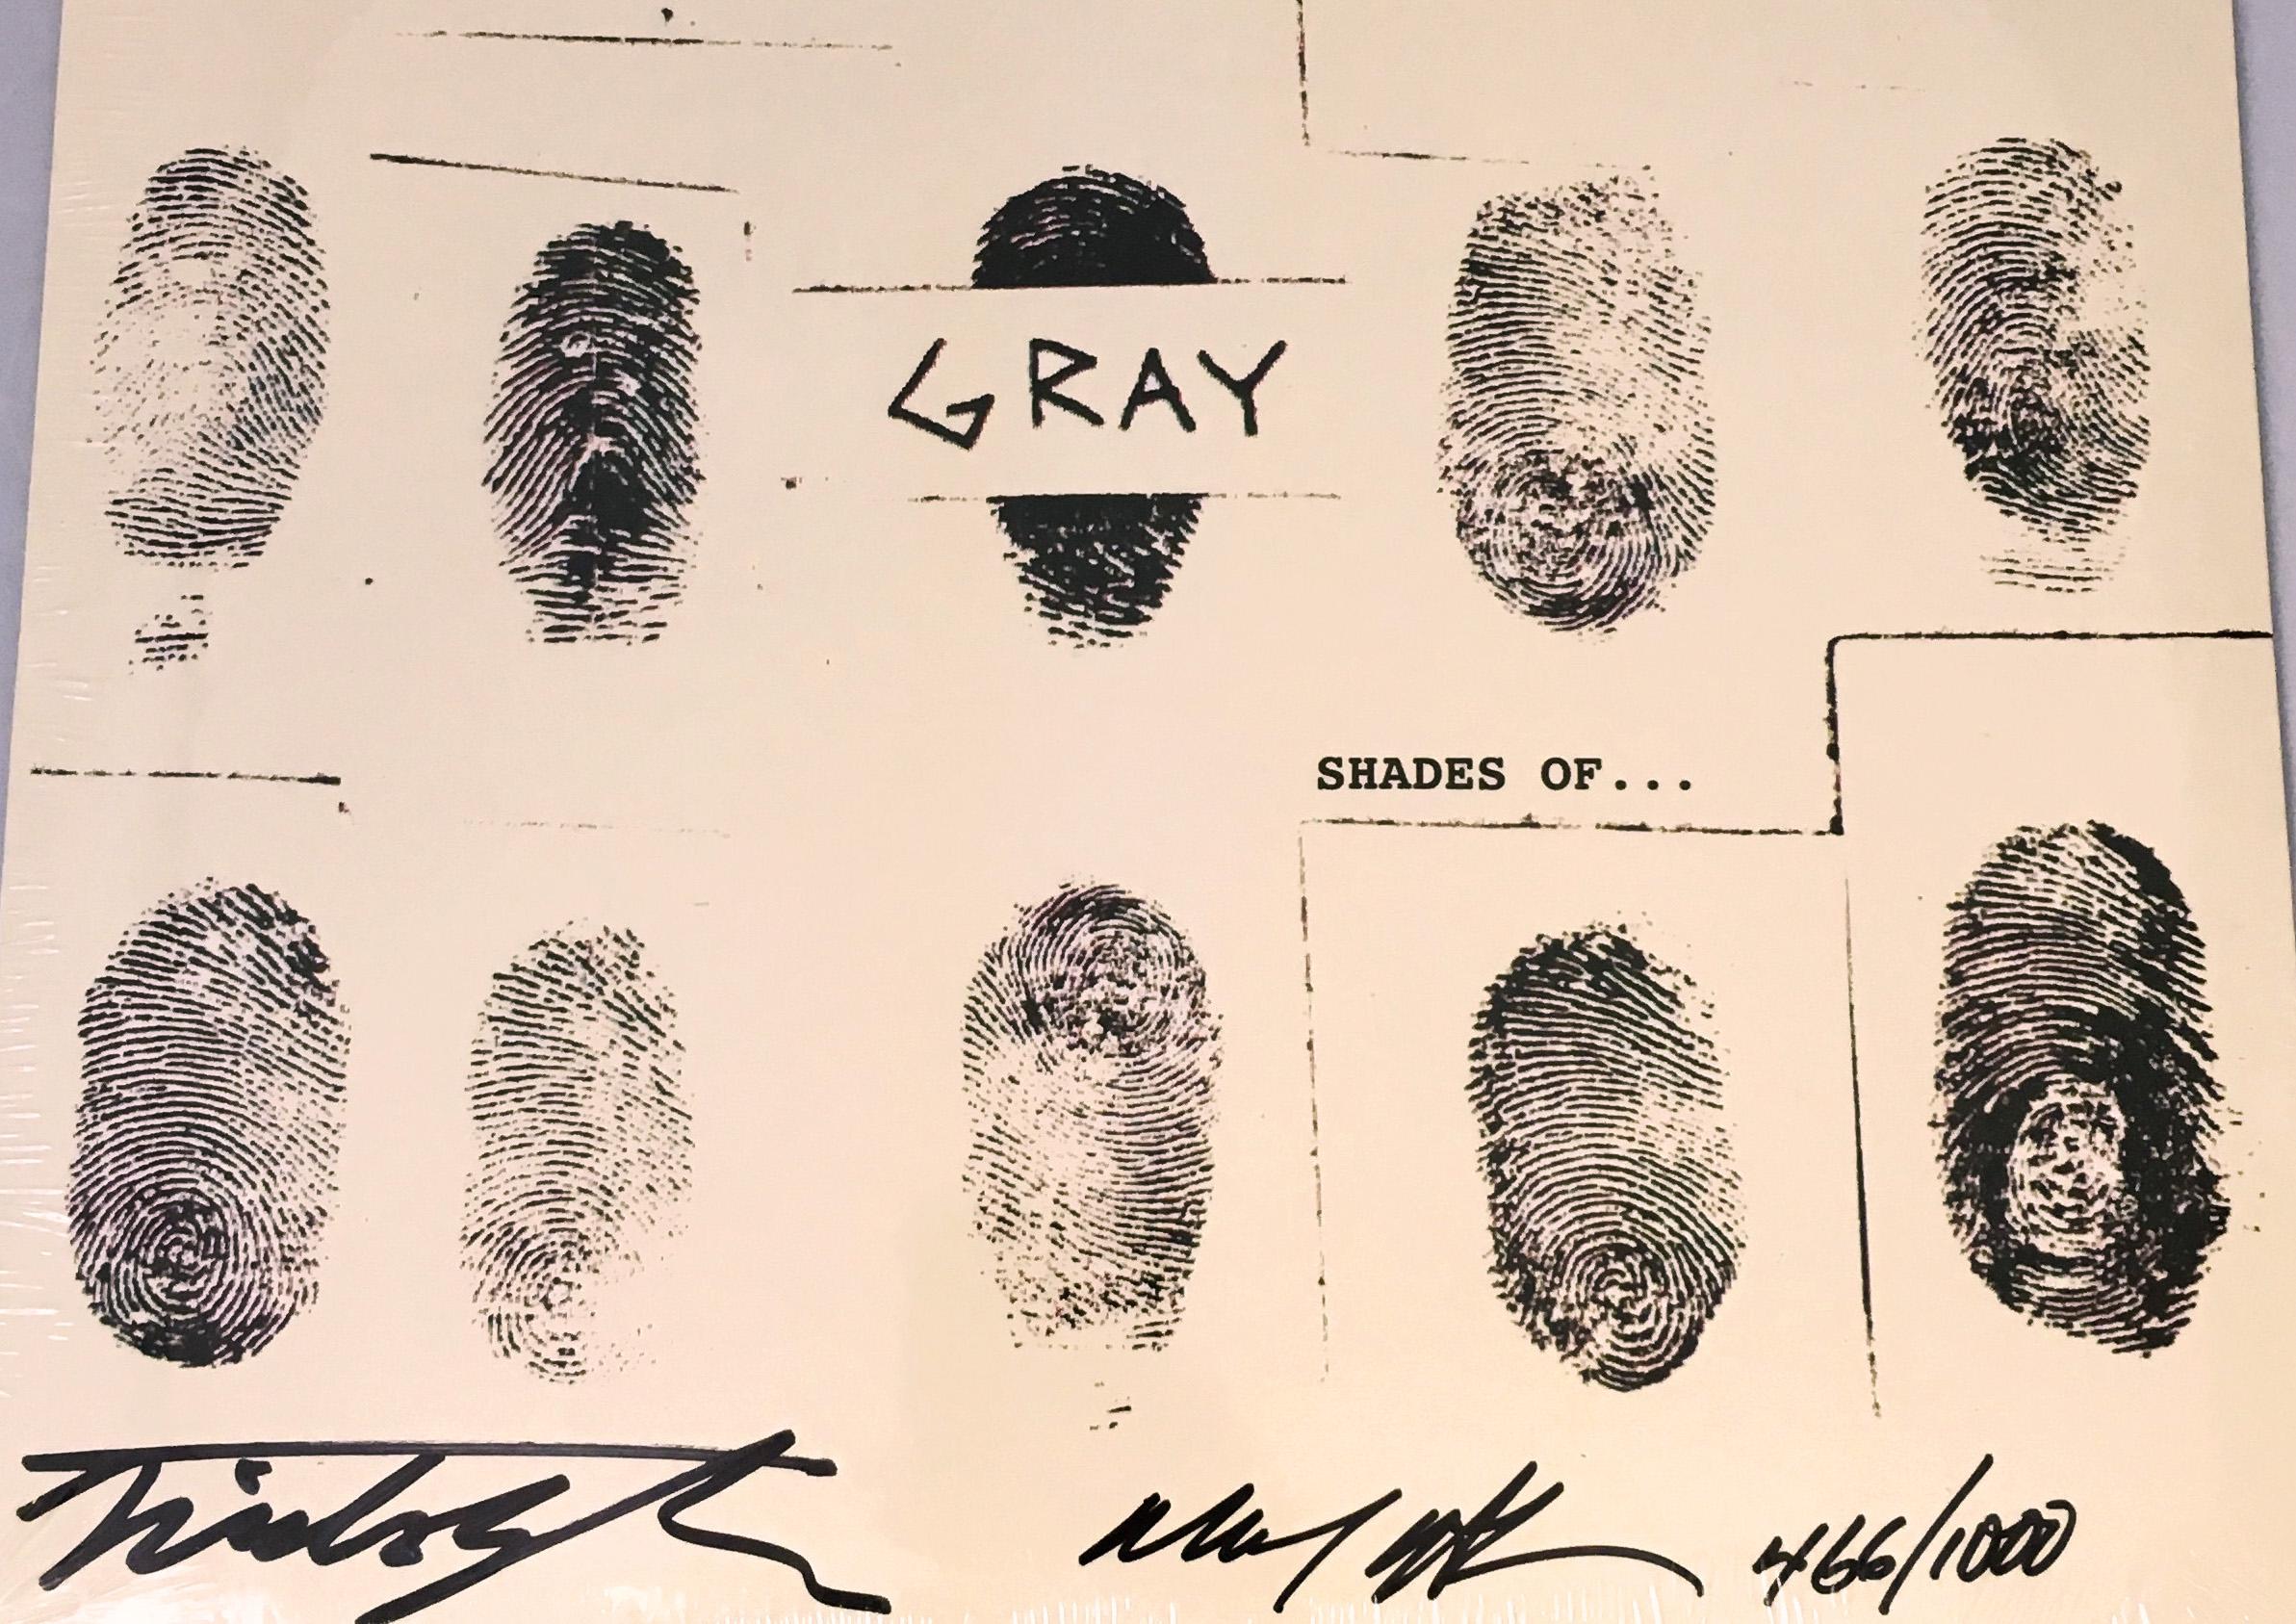 Rare "Gray, Shades of..." Vinyl Record Album featuring offset cover art from Jean Michel Basquiat, "who immortalized the work by integrating his fingerprint into the original piece (Gray Co-founder Michael Holman)." This jewel of a record also